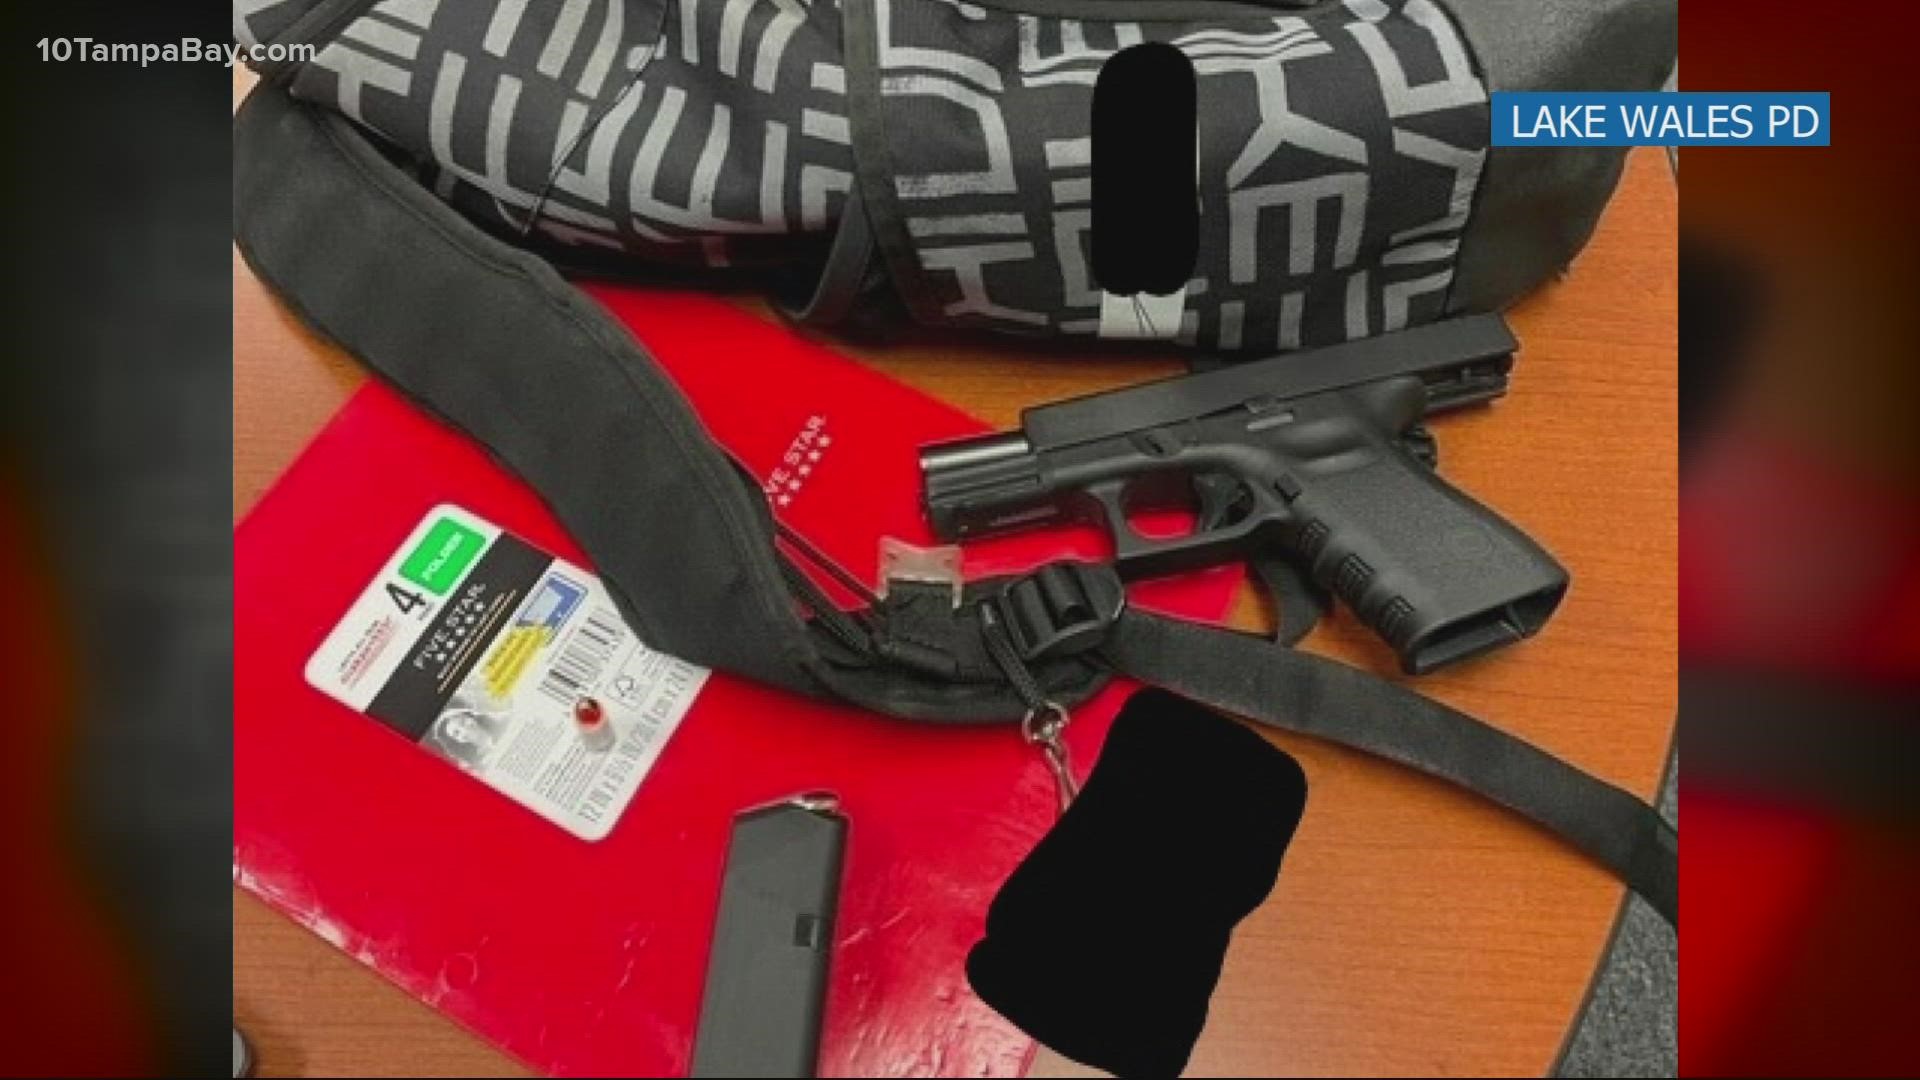 Police say a loaded handgun was found hidden in a backpack while officers were arresting a student after a fight Wednesday at Lake Wales High School.